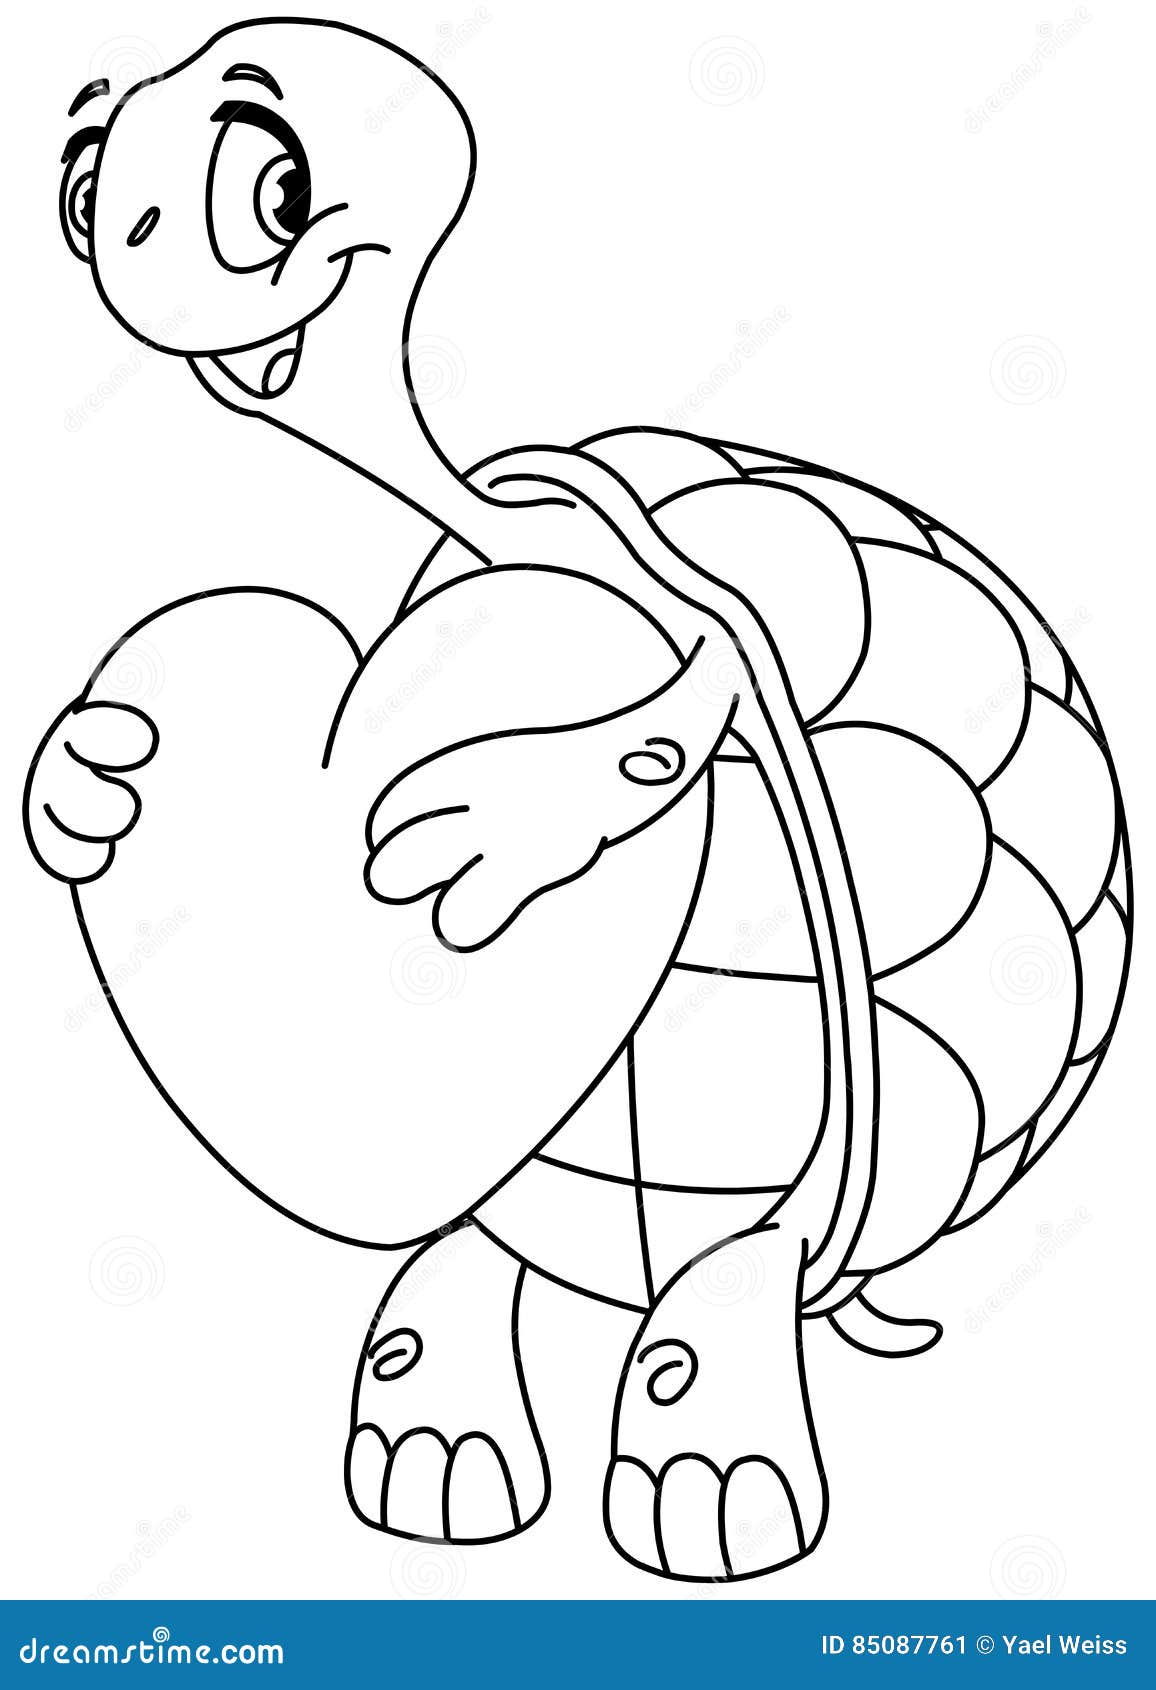 outlined turtle with heart